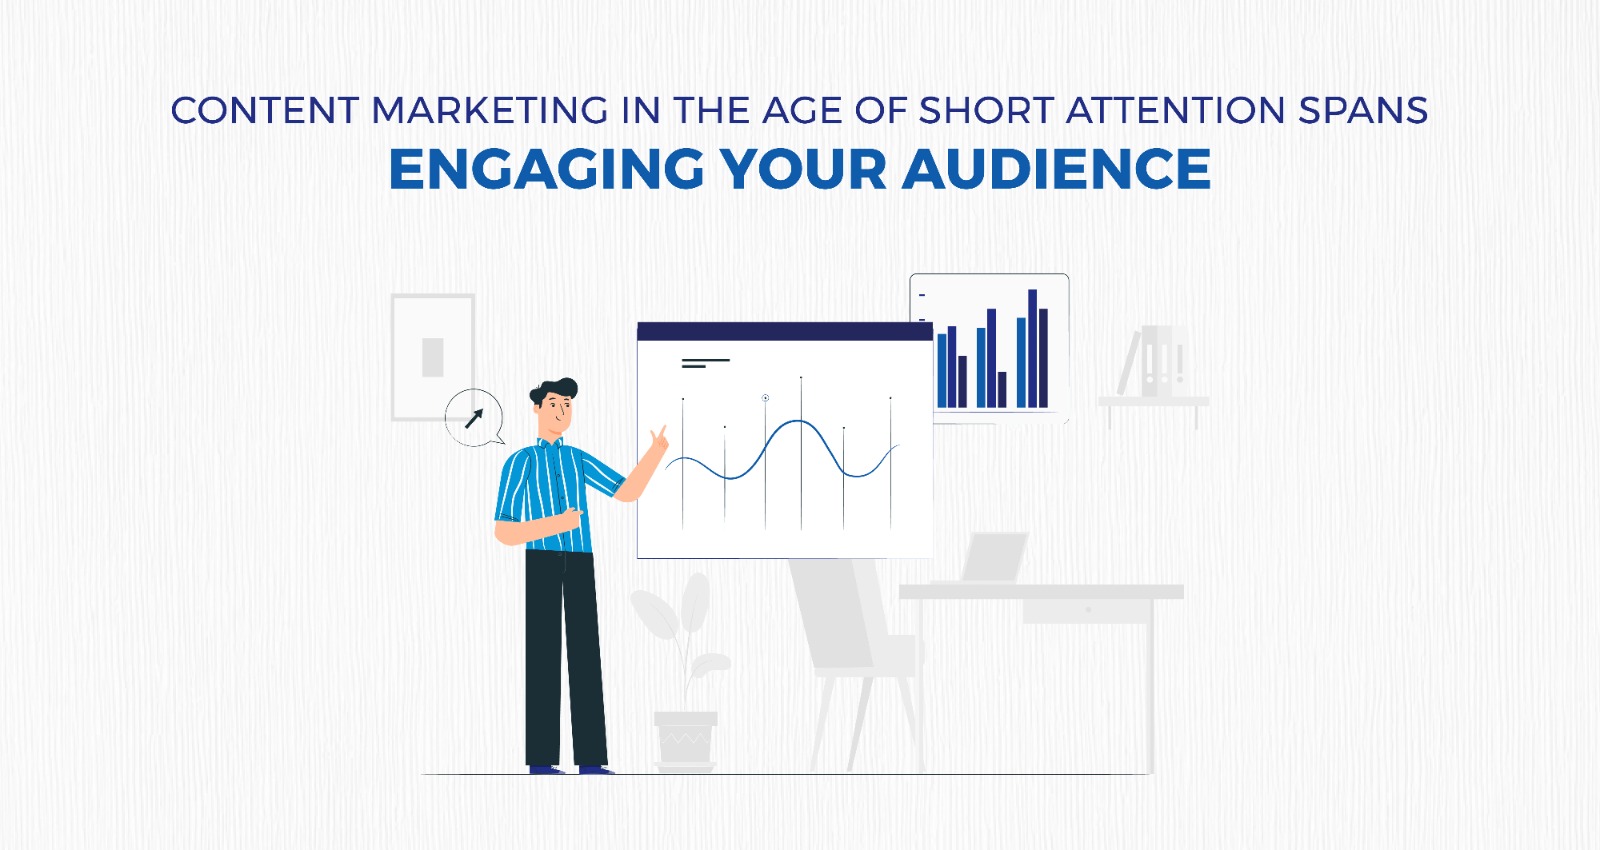 Content-Marketing-in-the-Age-of-Short-Attention-Spans-Engaging-Your-Audience-1.jpeg